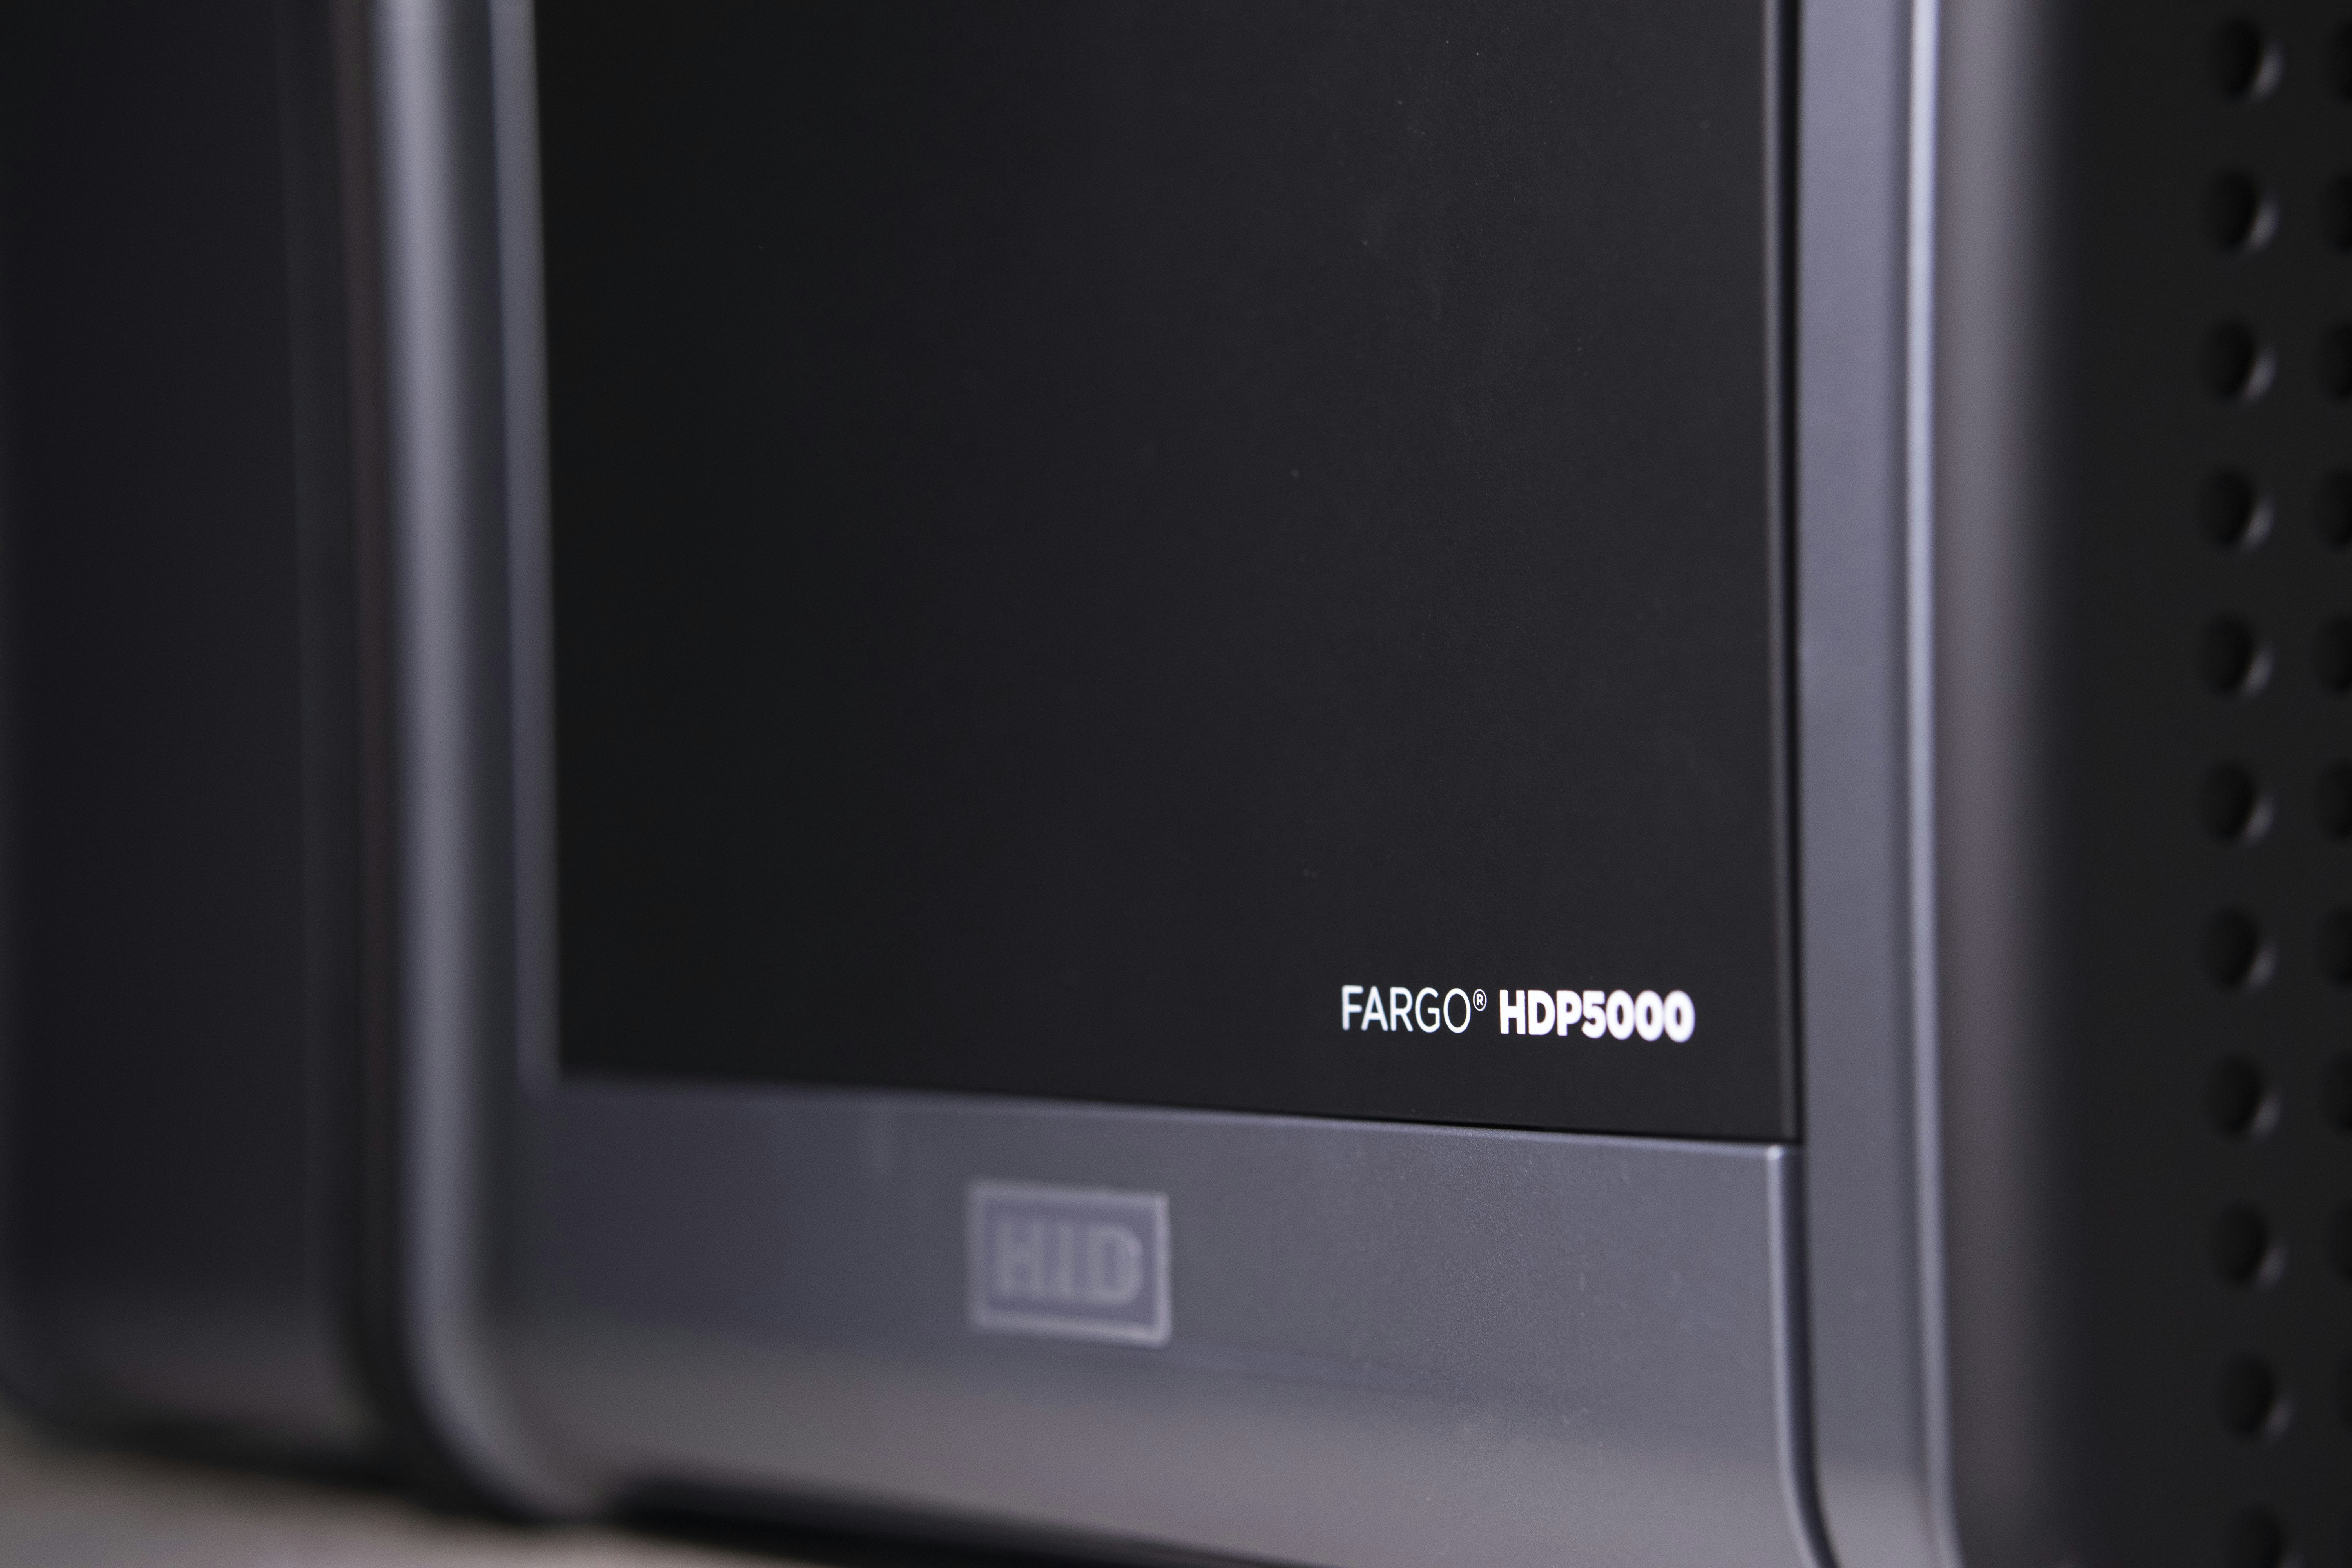 Fargo HDP5000 printer/encoder is the perfect solution for printing cards with embedded electronics.